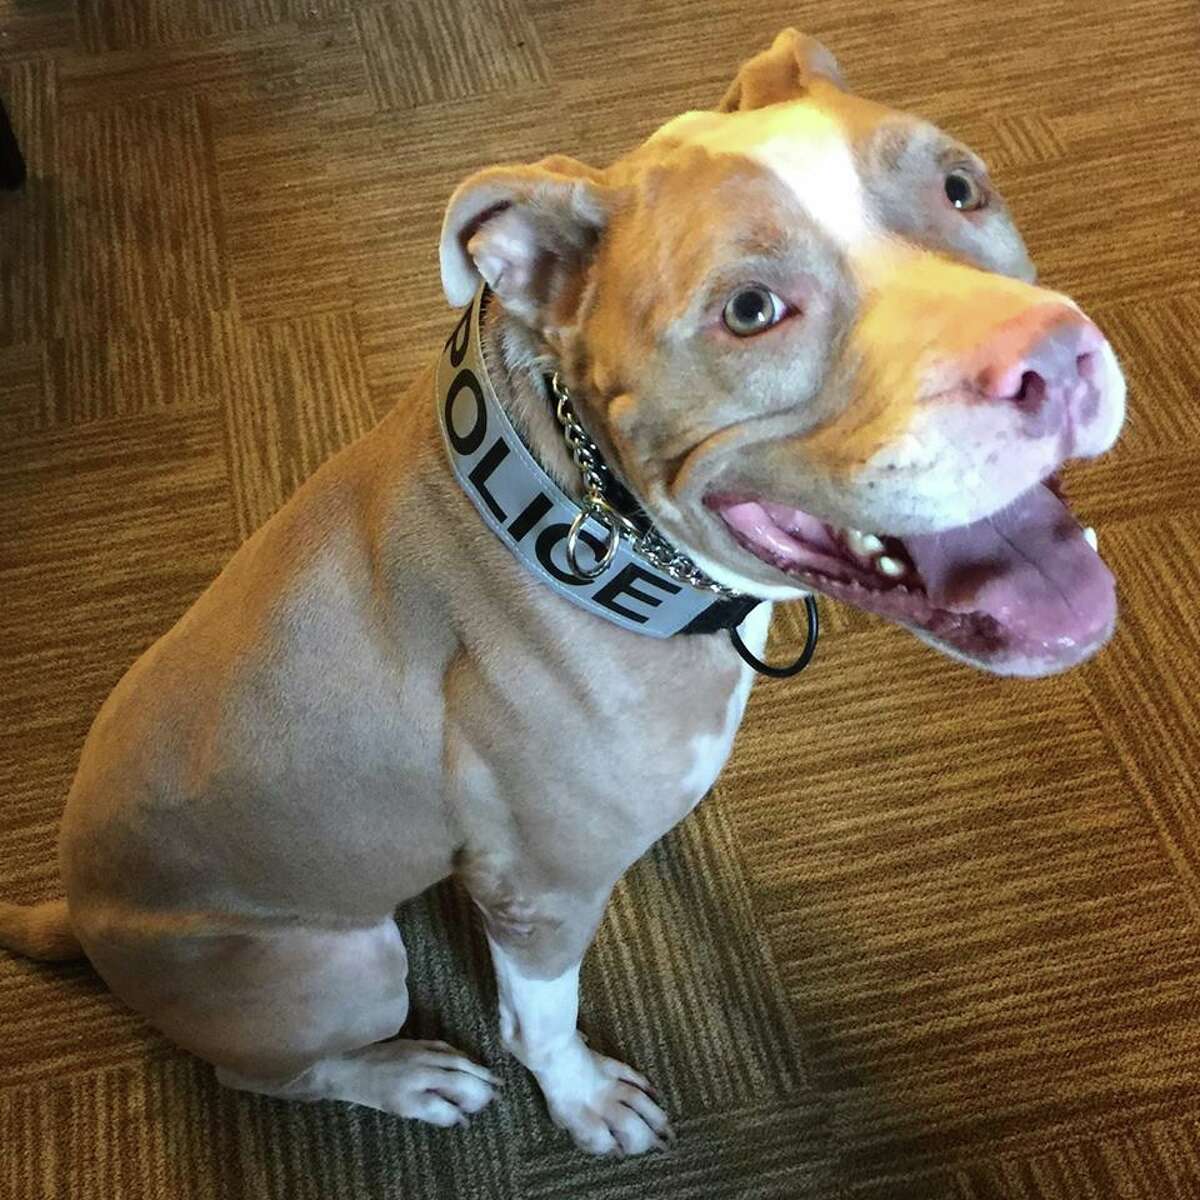 Kiah, who was once abandoned, battered and bloodied on San Antonio-area streets, will receive a New York City honor on Nov. 17 for being the first pit bull police dog in the state after she was relocated their last year.